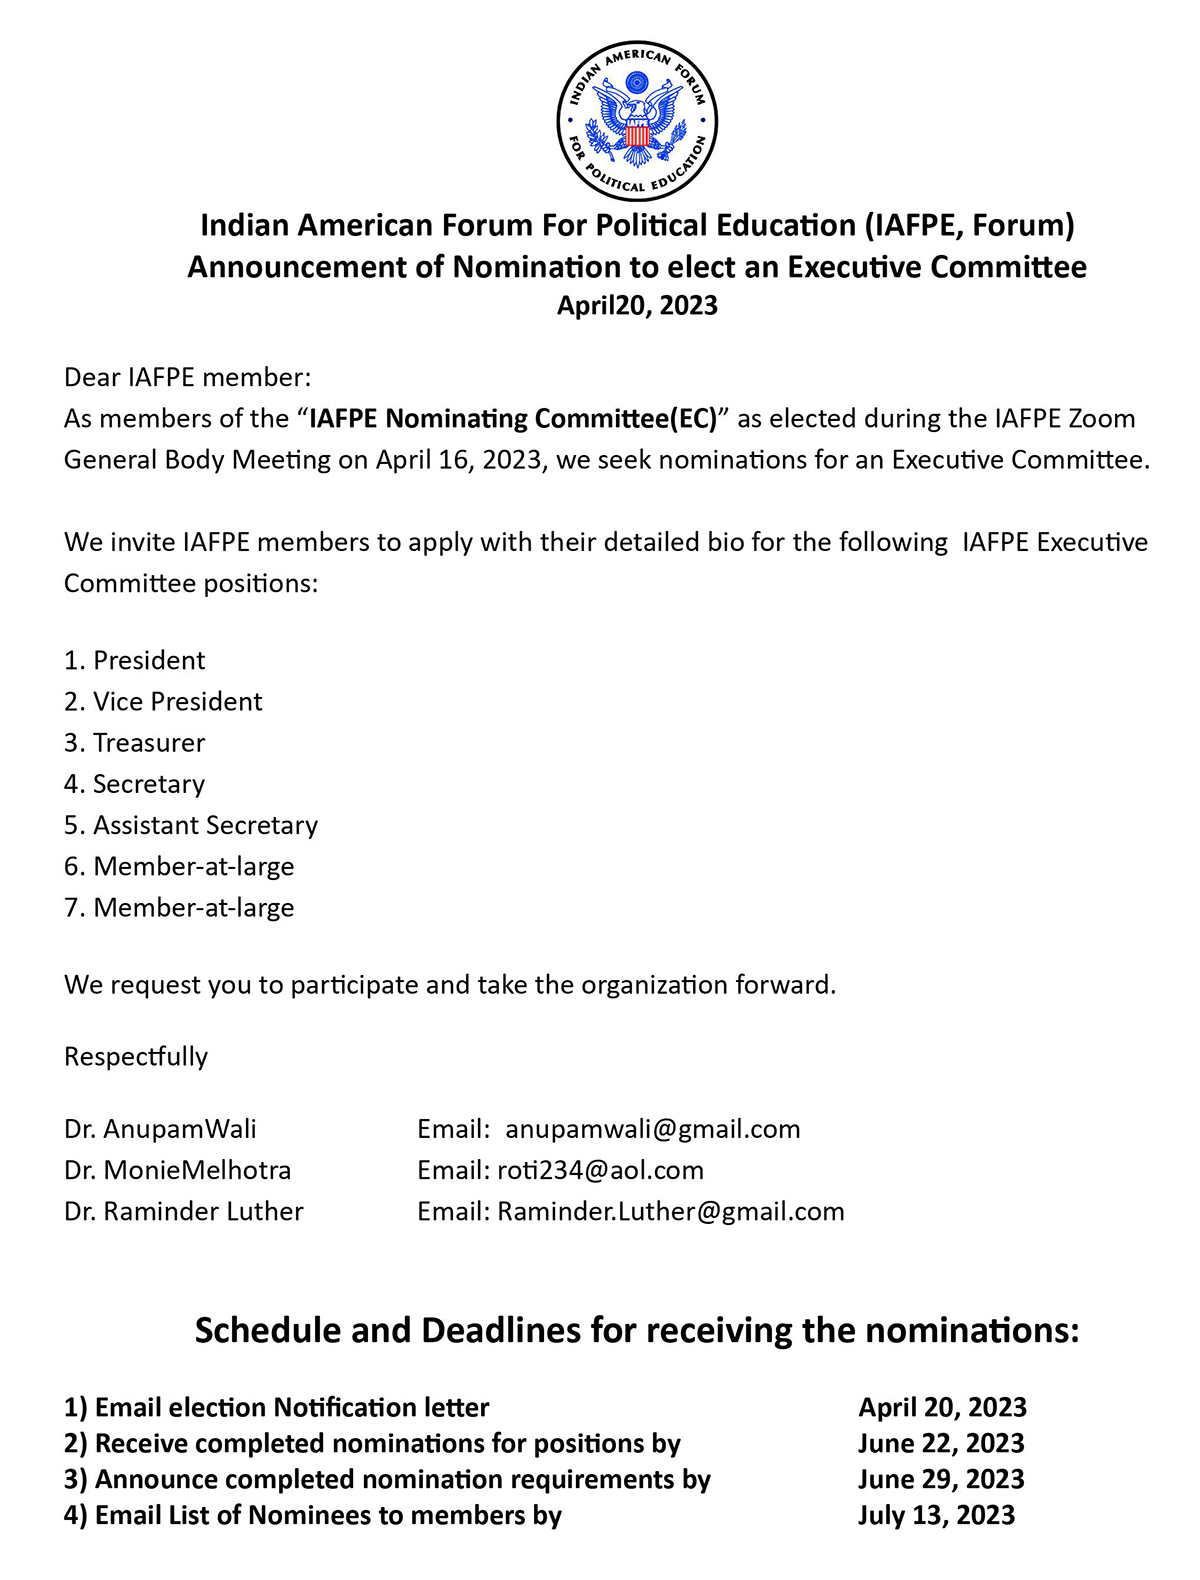 Announcement of Nomination to Elect an Executive Committee